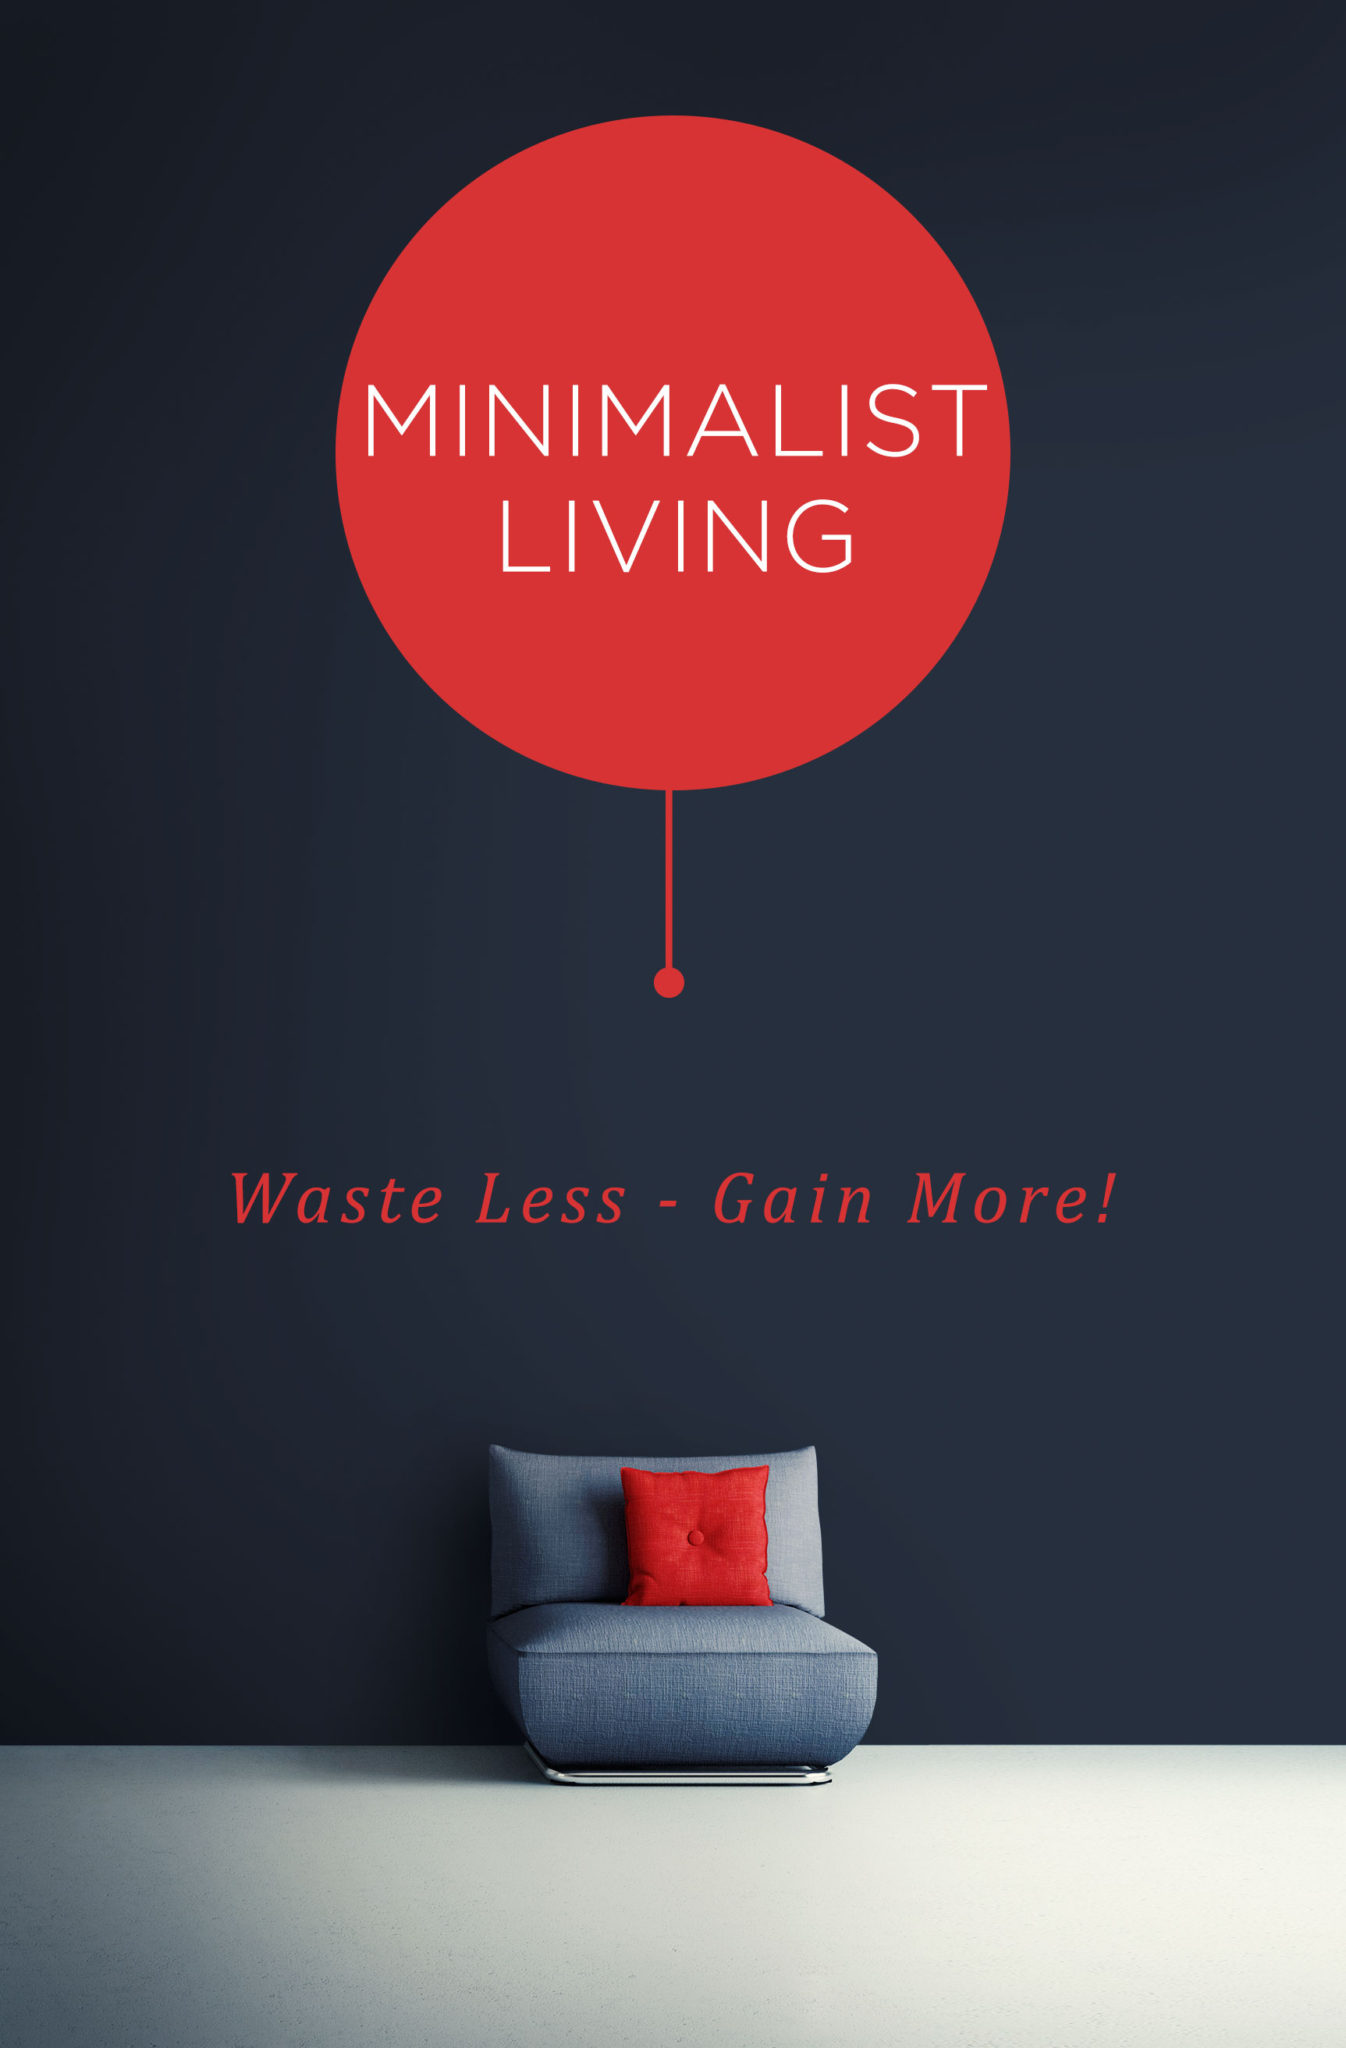 FREE: Minimalist Living: Waste Less – Gain More! by Henry J